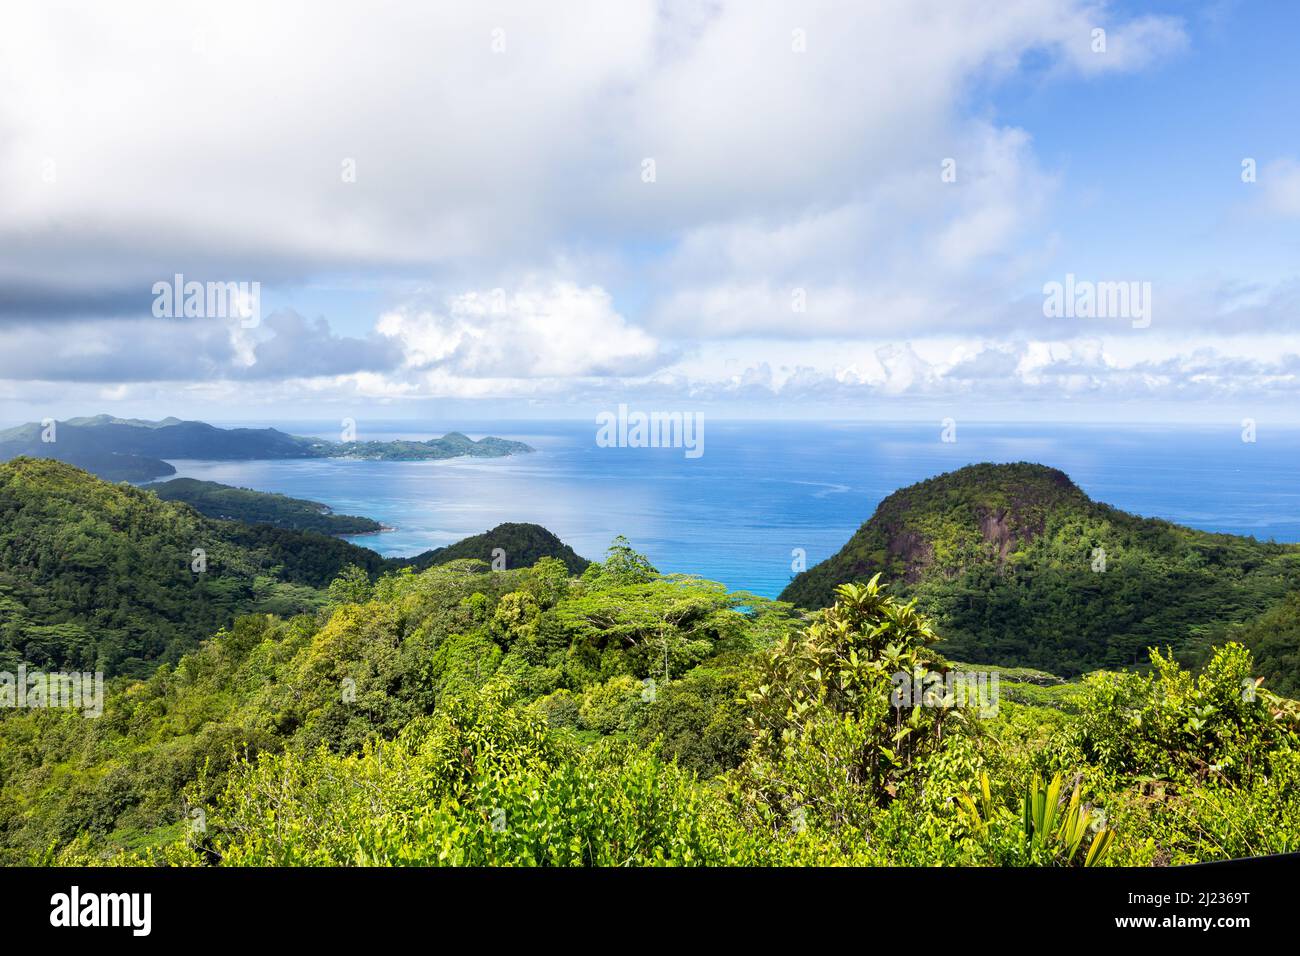 Landscape of Mahe Island coast seen from Venn's Town - Mission Lodge wooden viewing platform, lush tropical forest with crystal blue Indian Ocean. Stock Photo